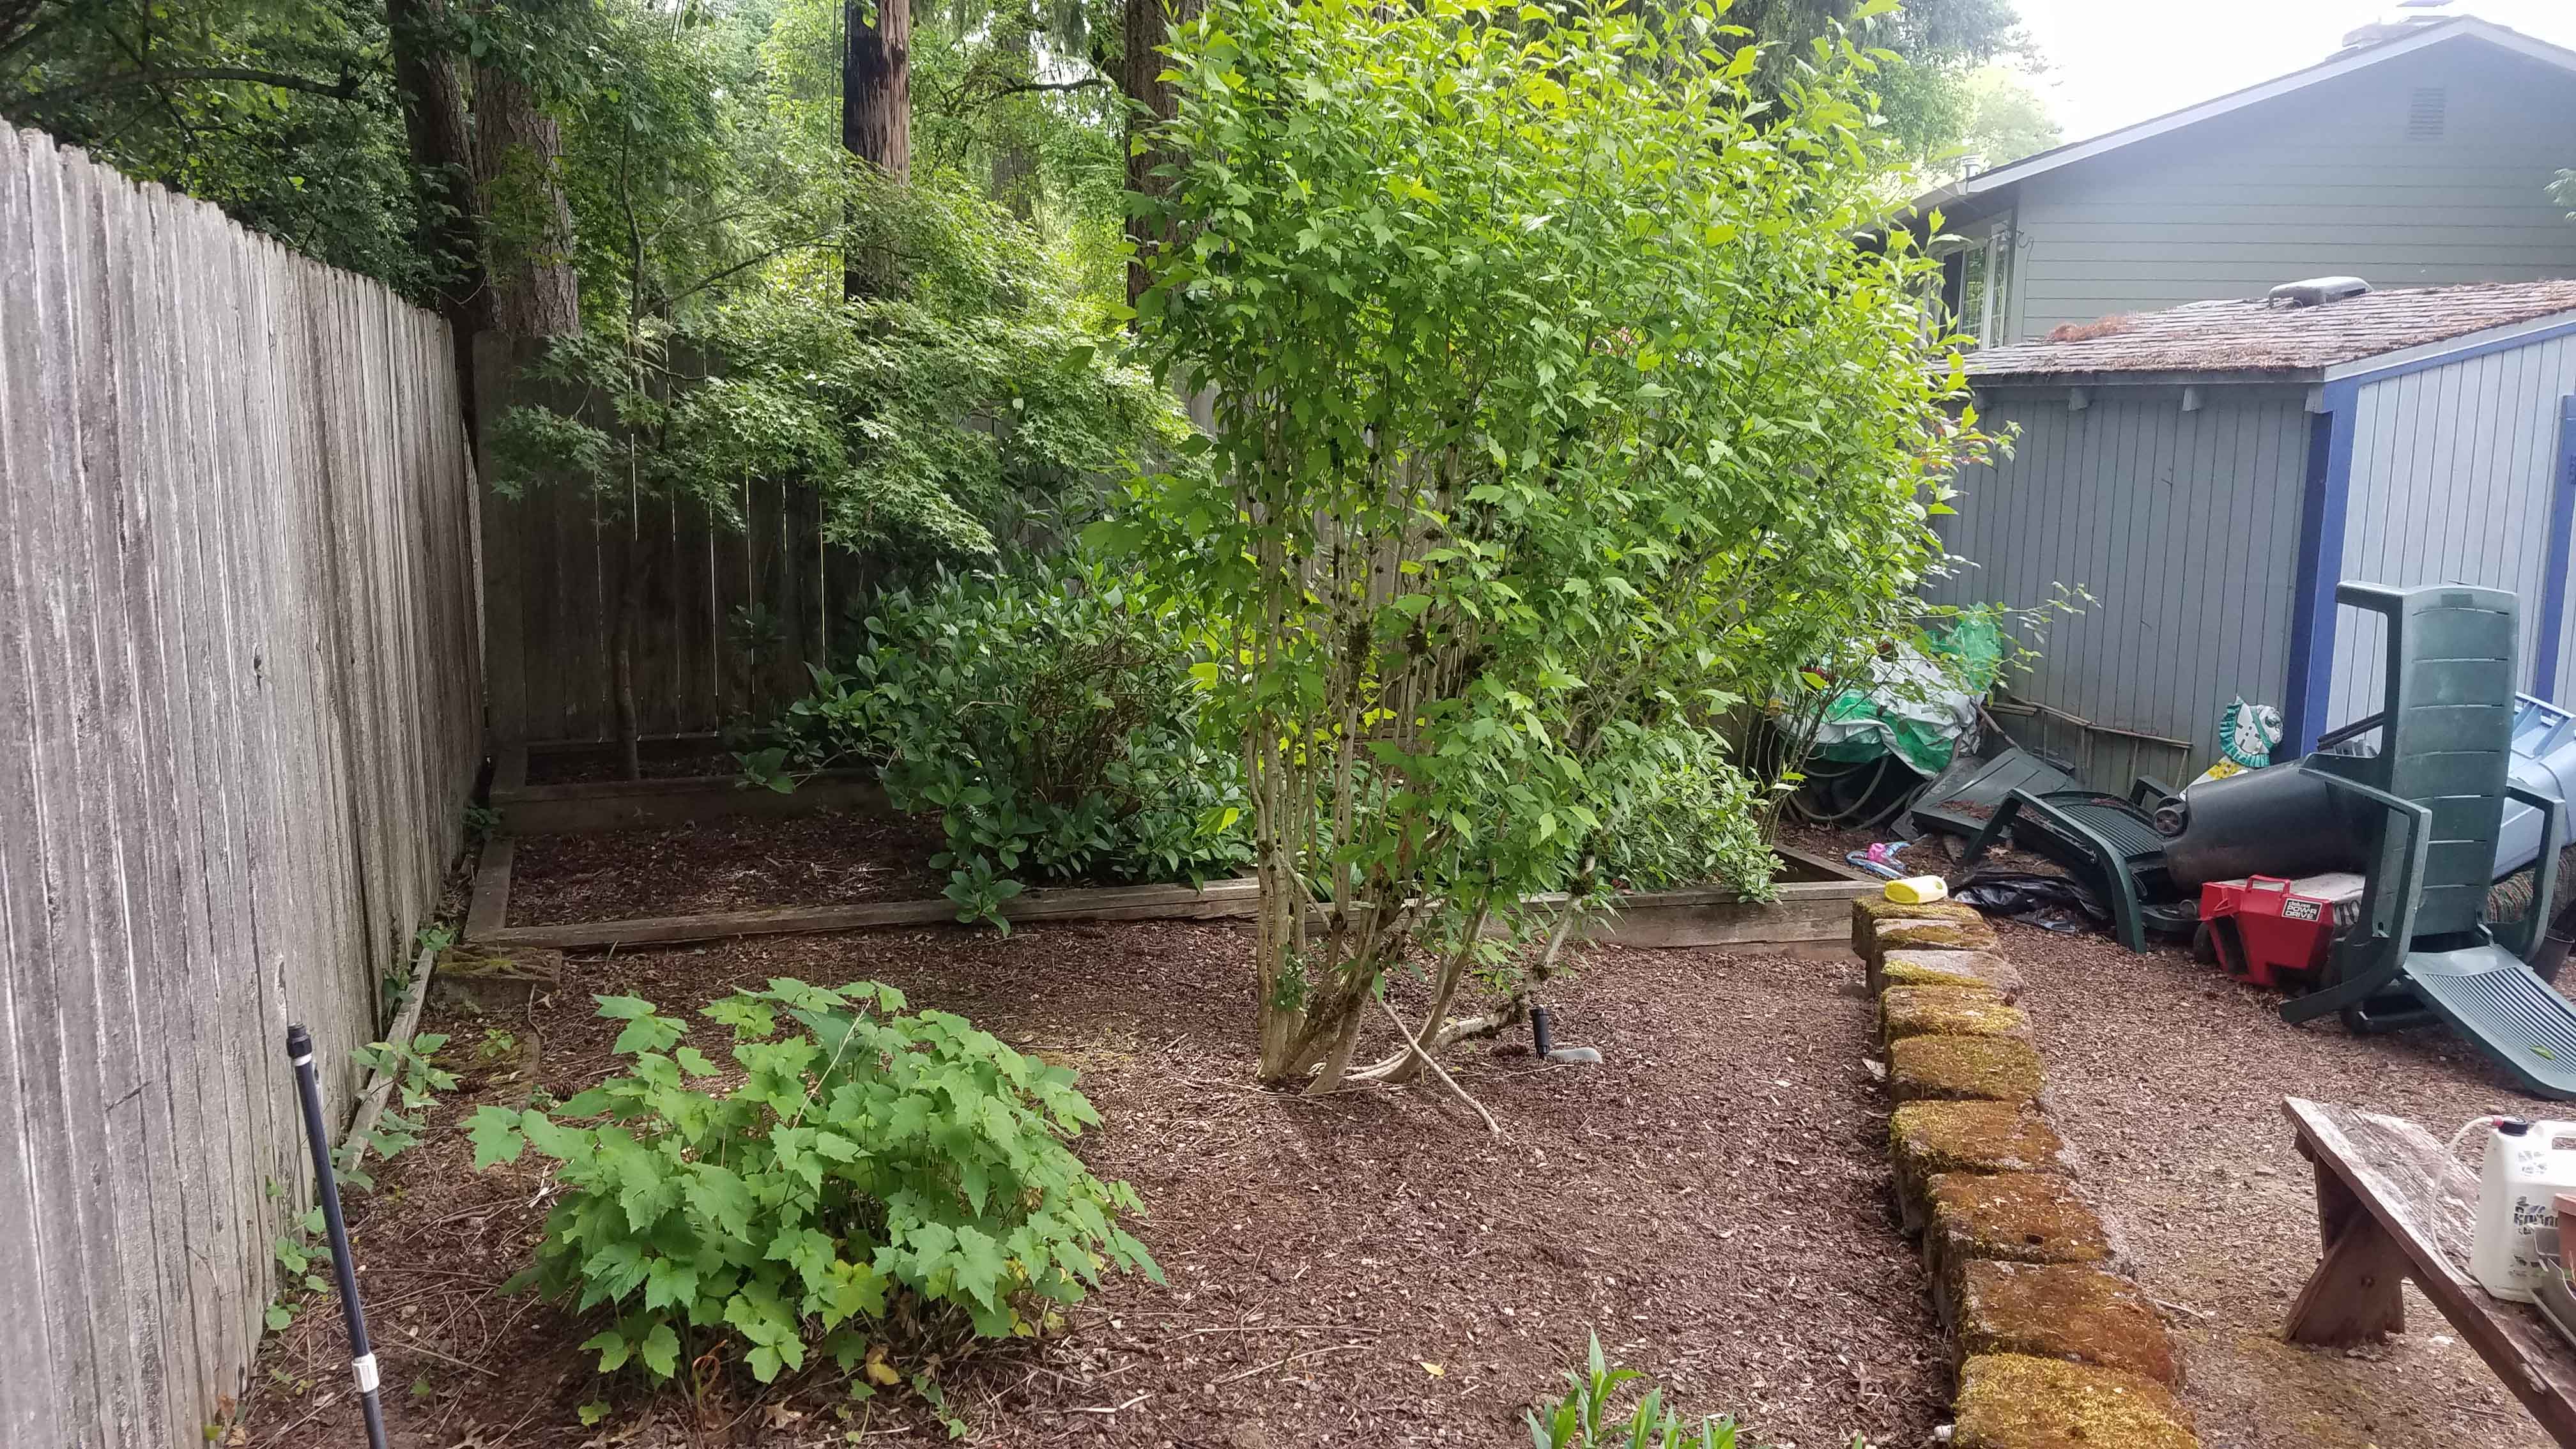 Backyard with dirt path, patchy grass and decorations strewn about